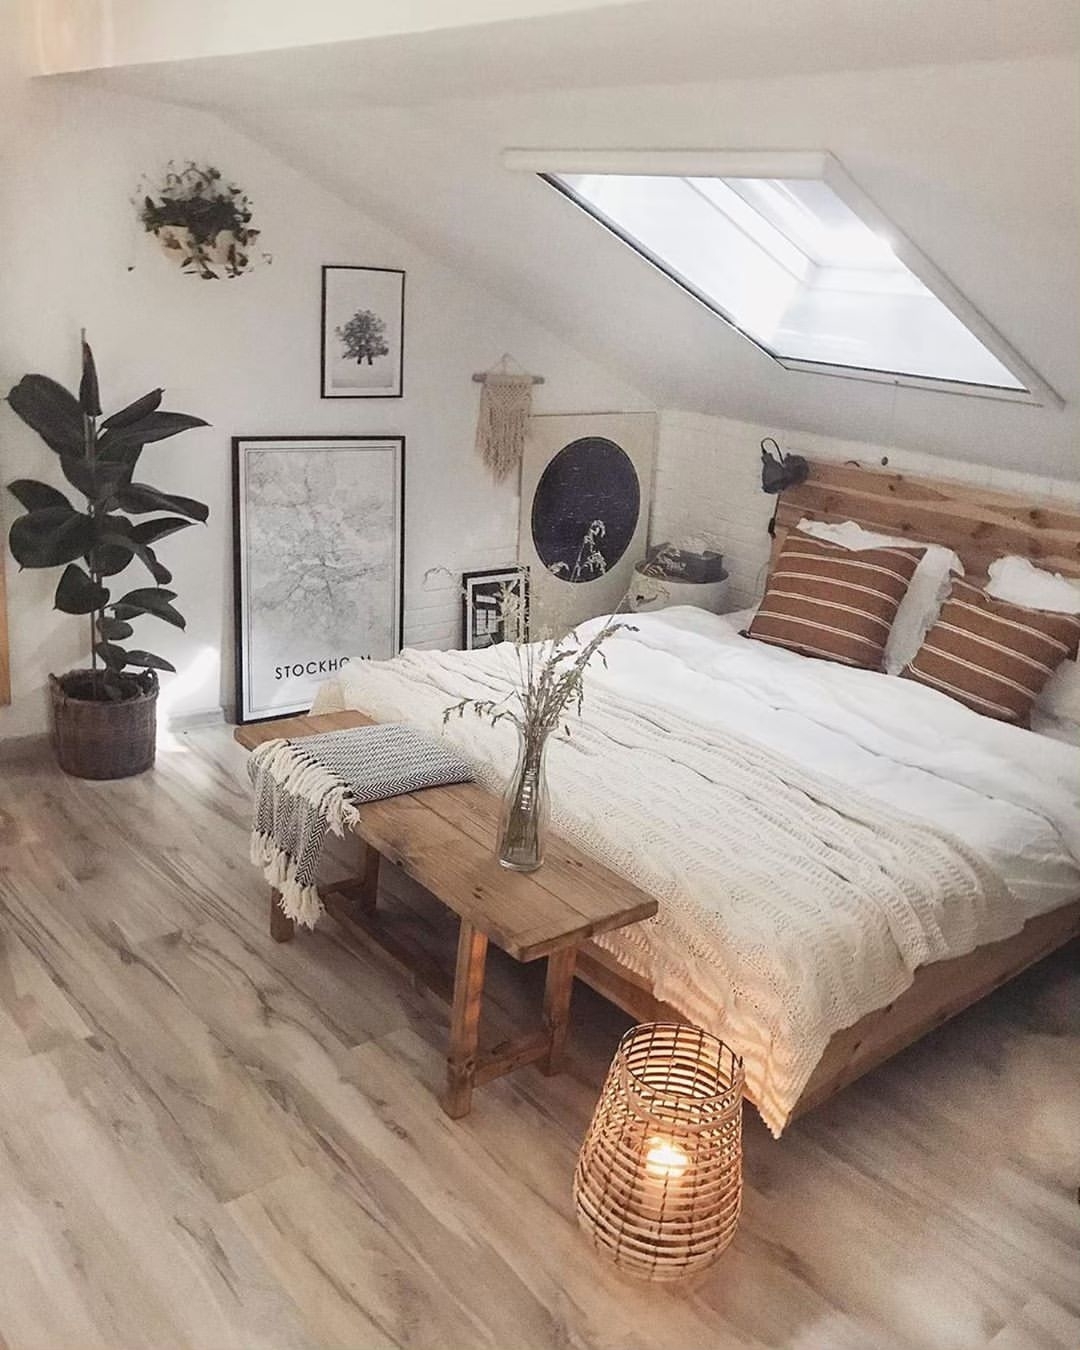 Wood and cream bedroom